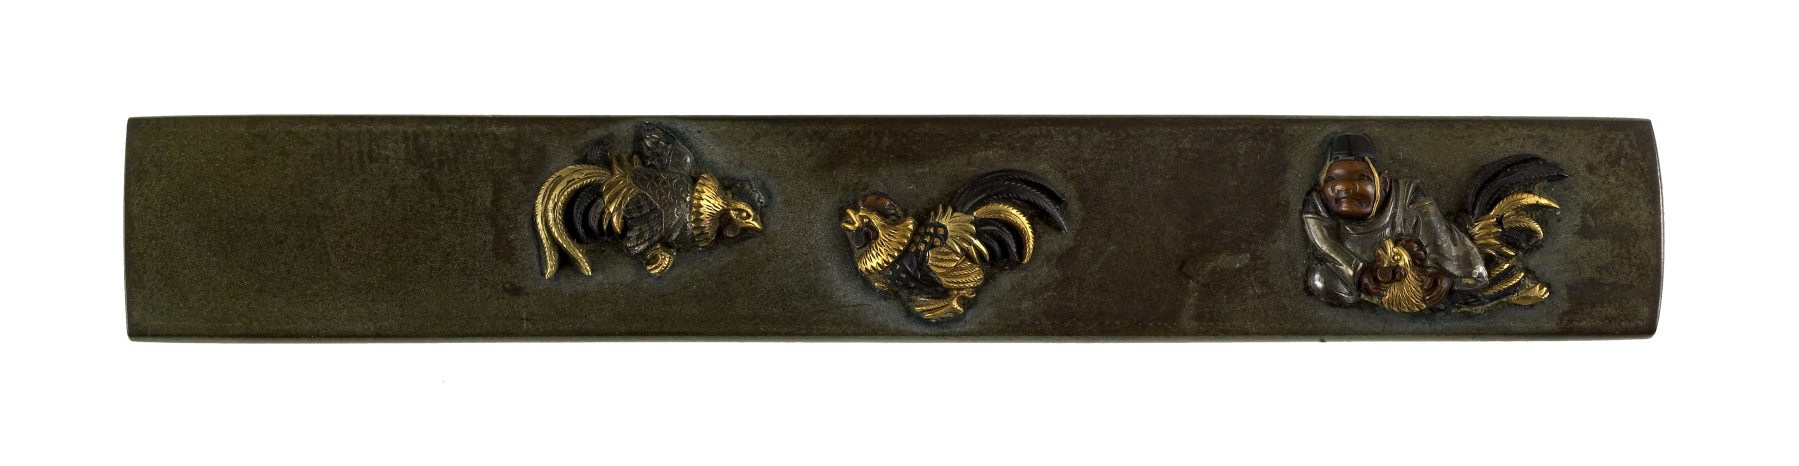 Image for Kozuka with a Man and Three Fighting Cocks